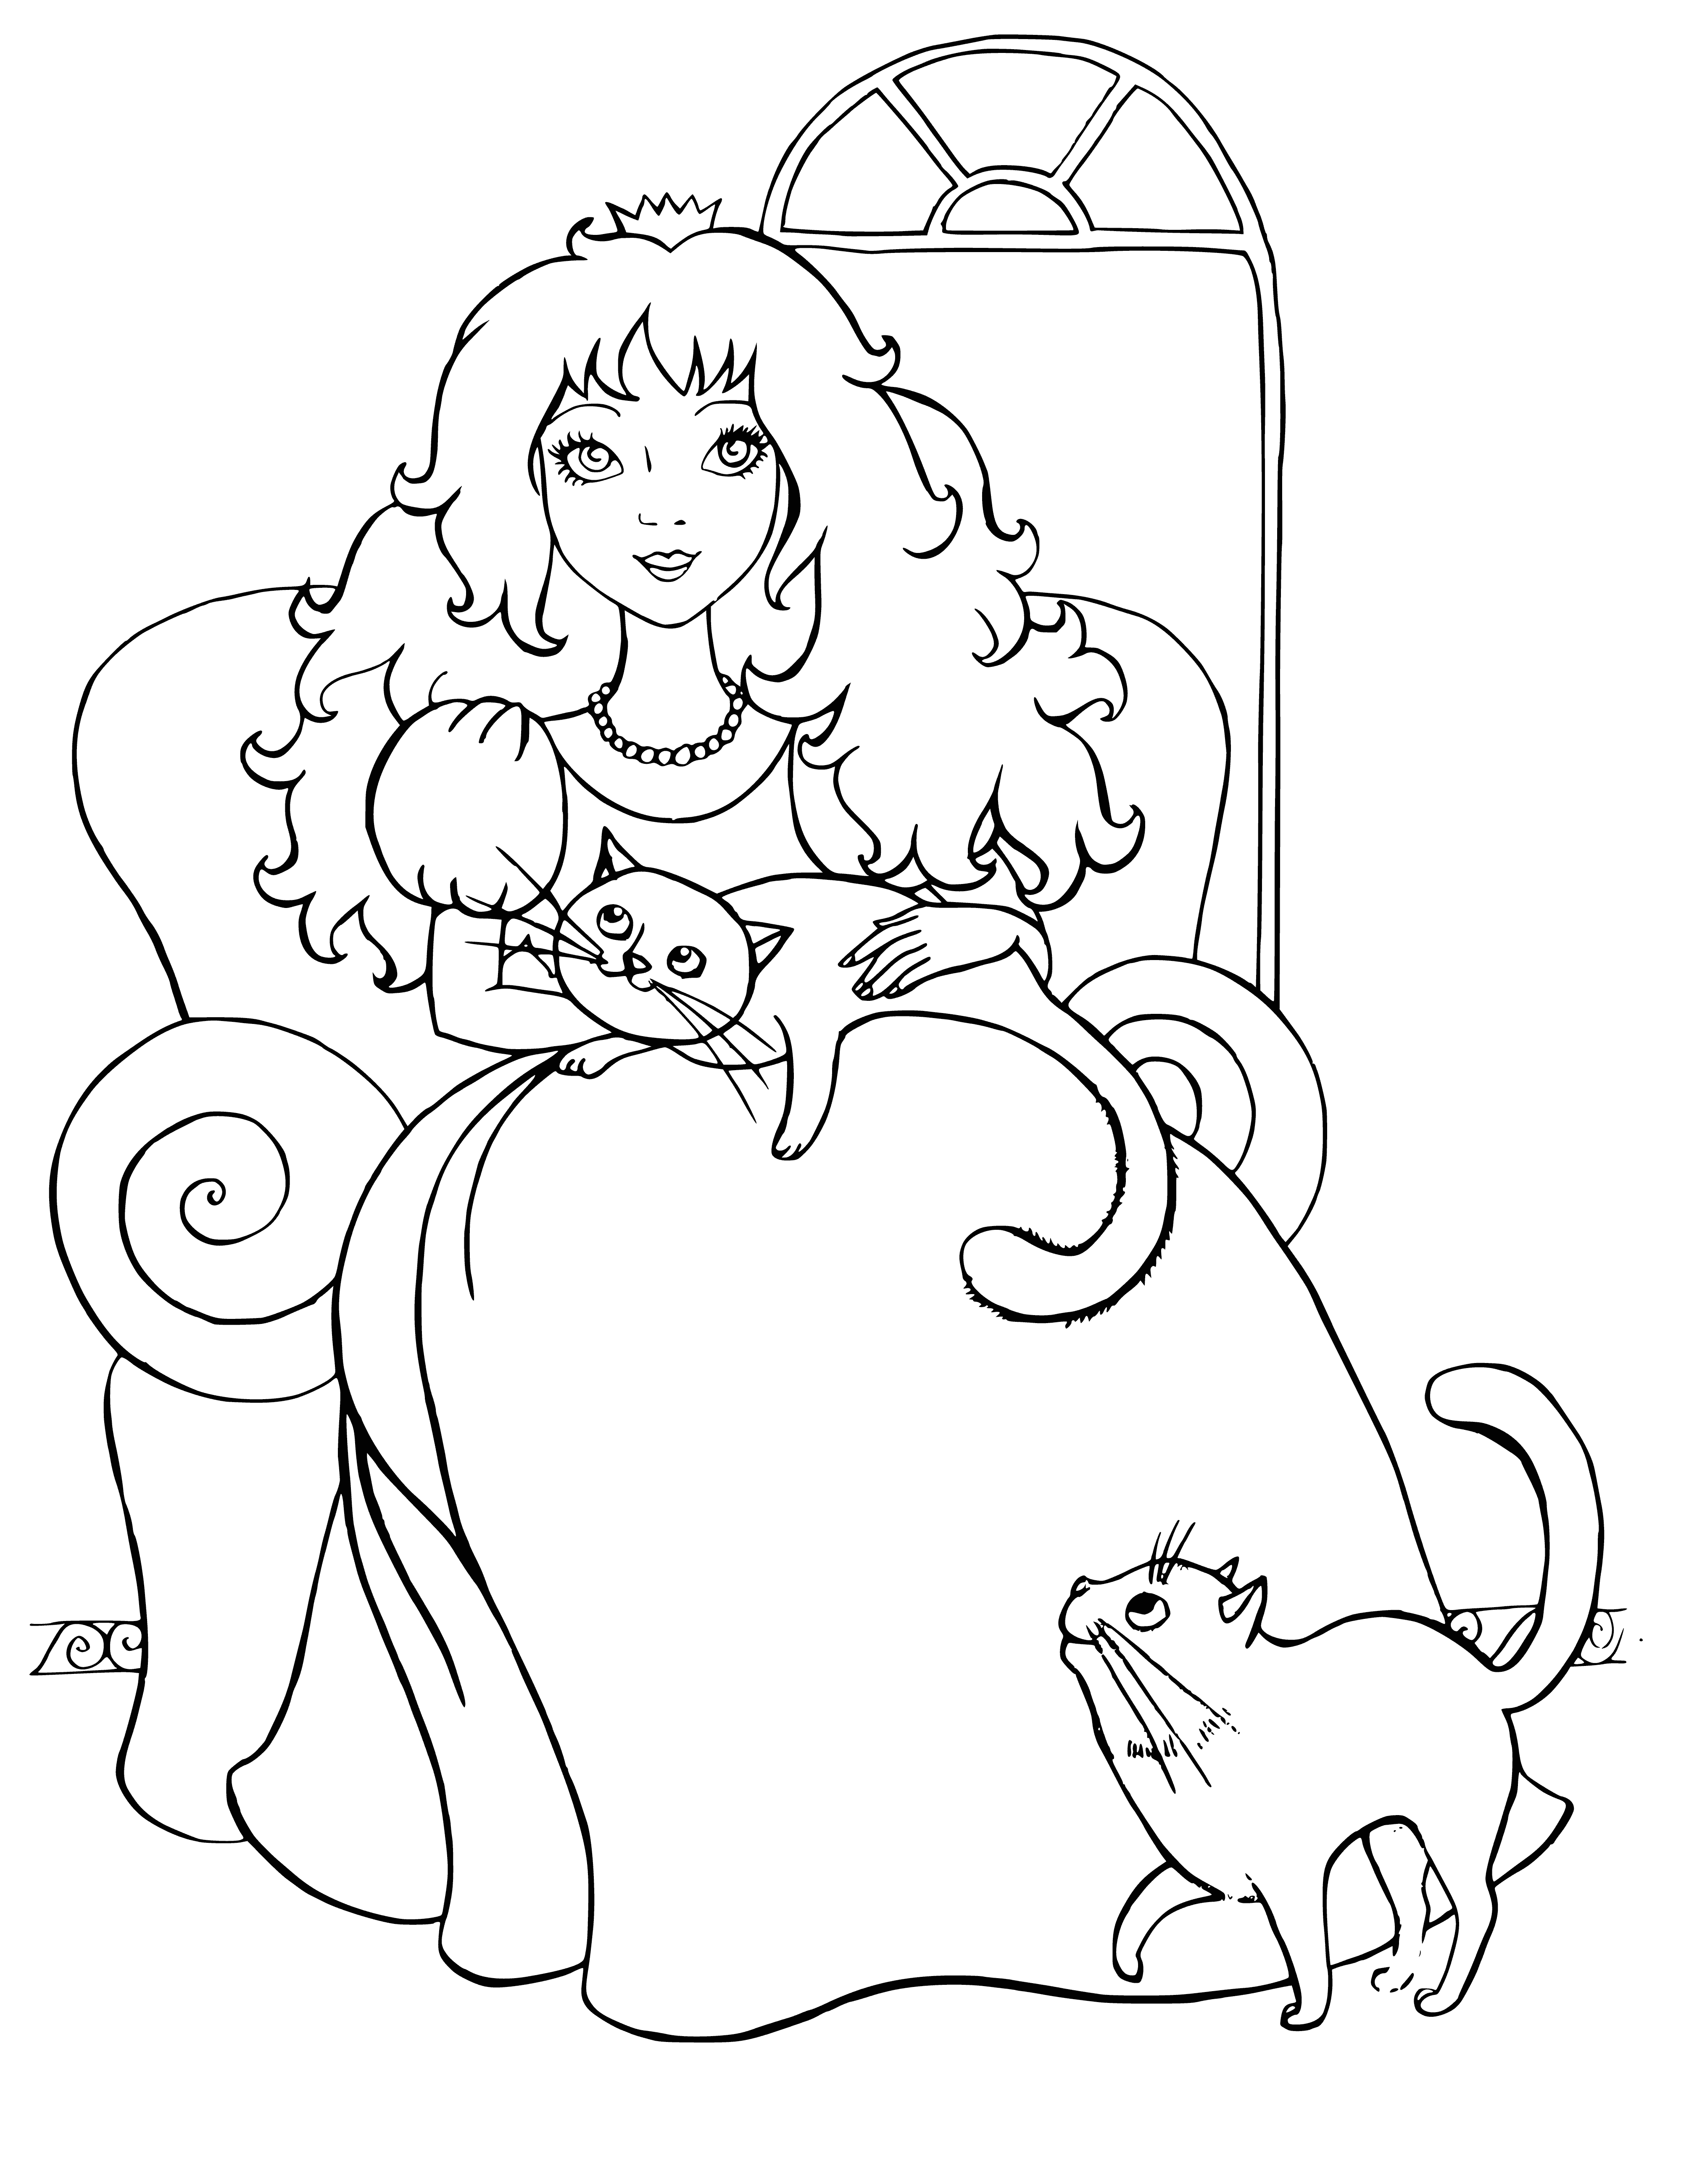 coloring page: Princess with tiara and kittens adoring her feet in a castle with turreted towers and stained glass windows.